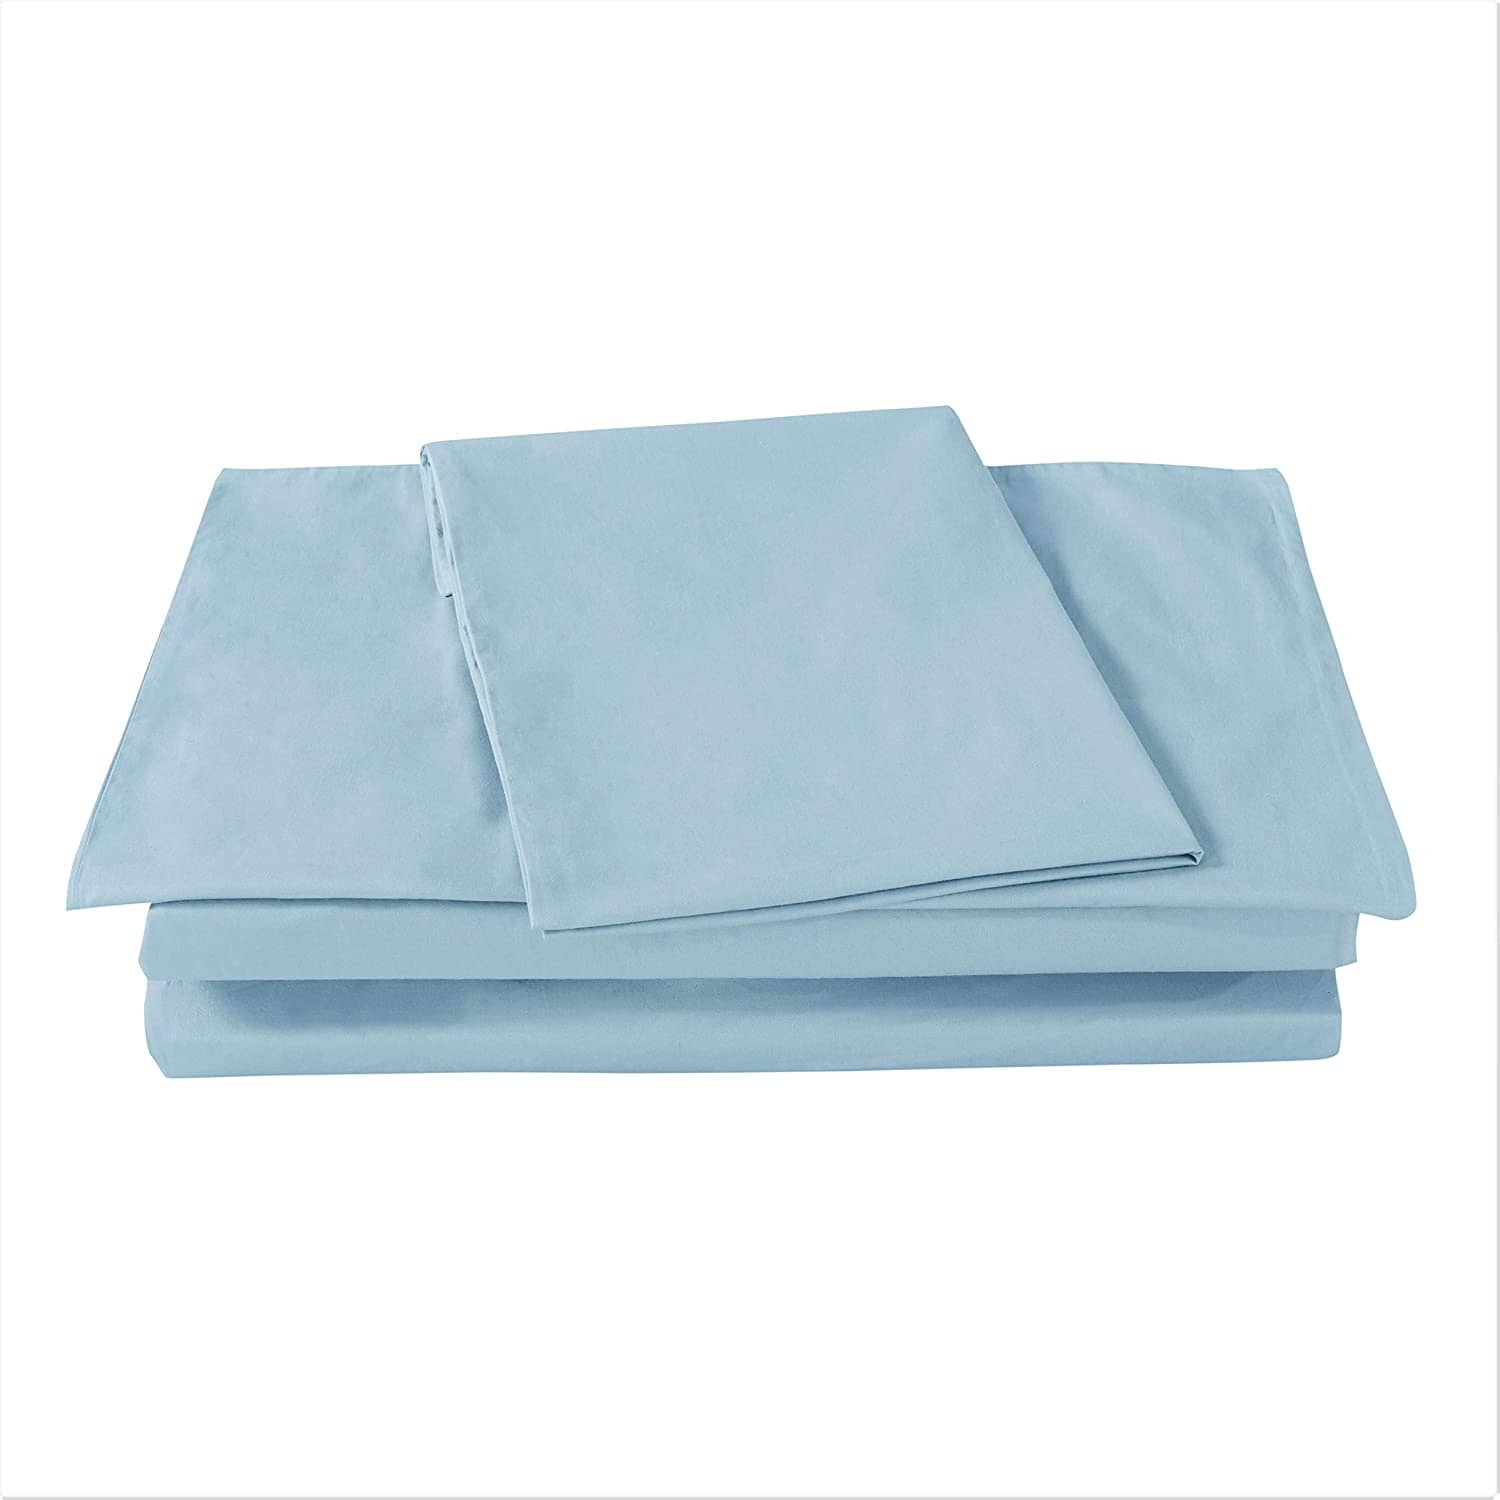 High quality Light sky Blue Cotton Fitted Sheet and Pillowcase Set for ultimate comfort. 100% premium cotton construction, available in twin, full, queen, king, and California king sizes